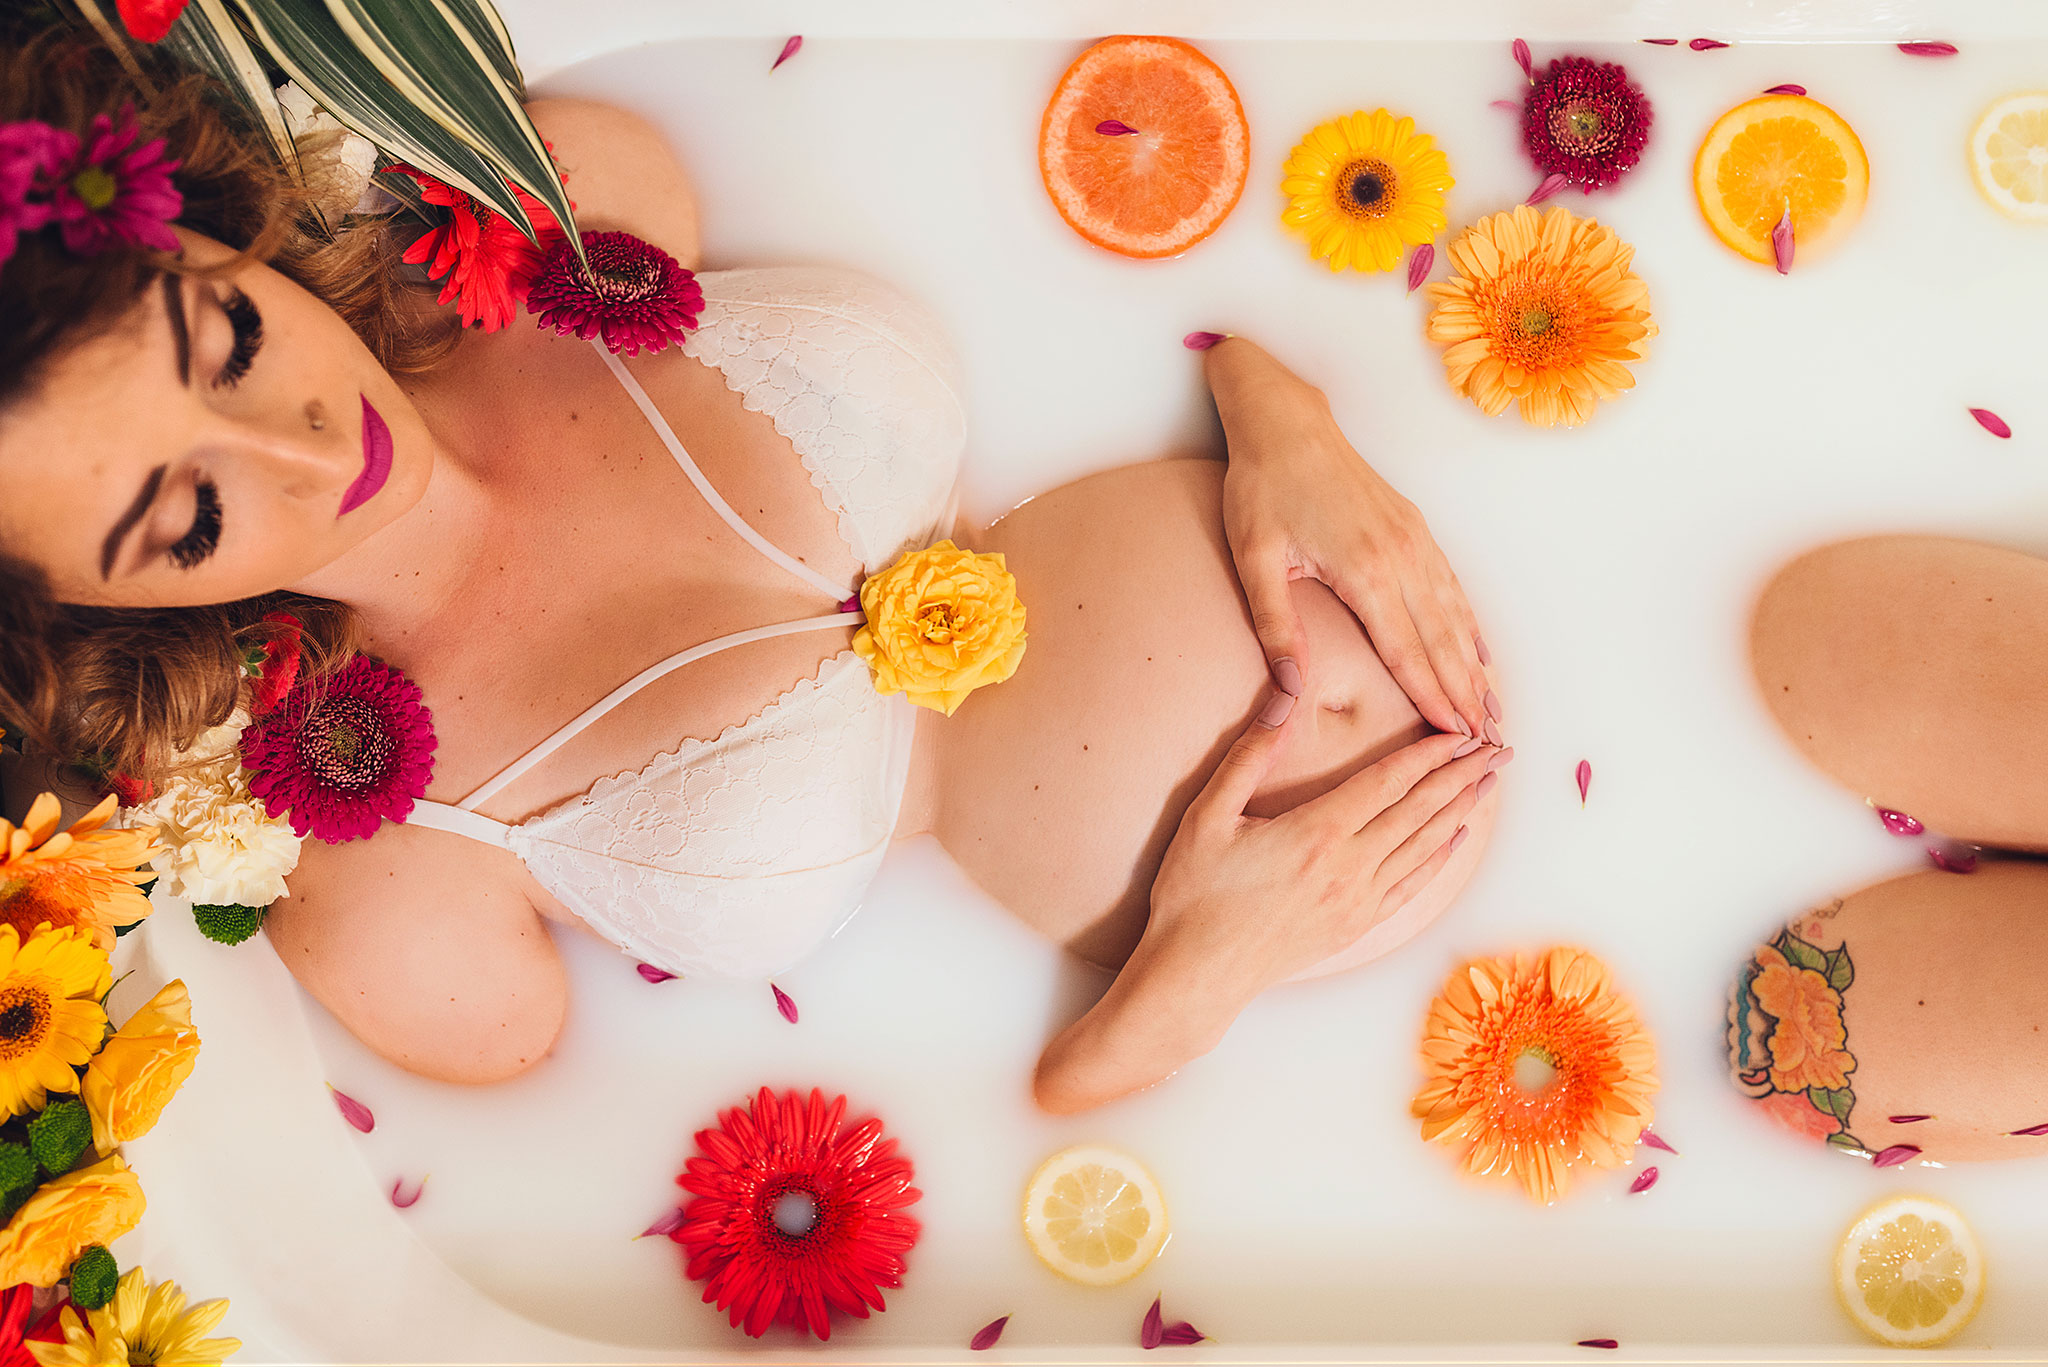 Milk bath maternity photography with brightly coloured flowers and citrus.